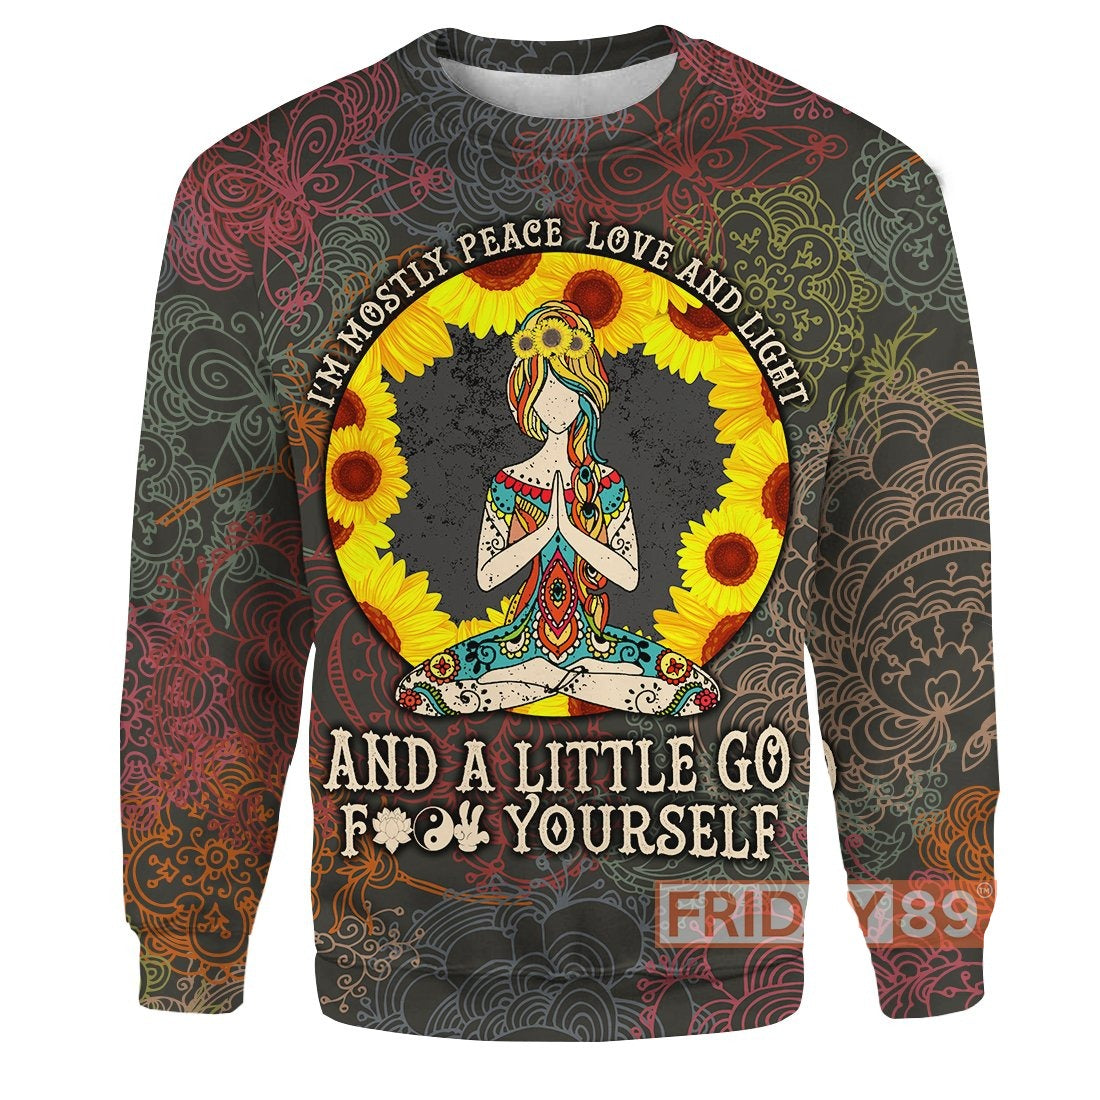 Unifinz Hippie T-shirt I'm Mostly Peace Love And Light T-shirt Awesome Hippie Hoodie Sweater Tank 2023